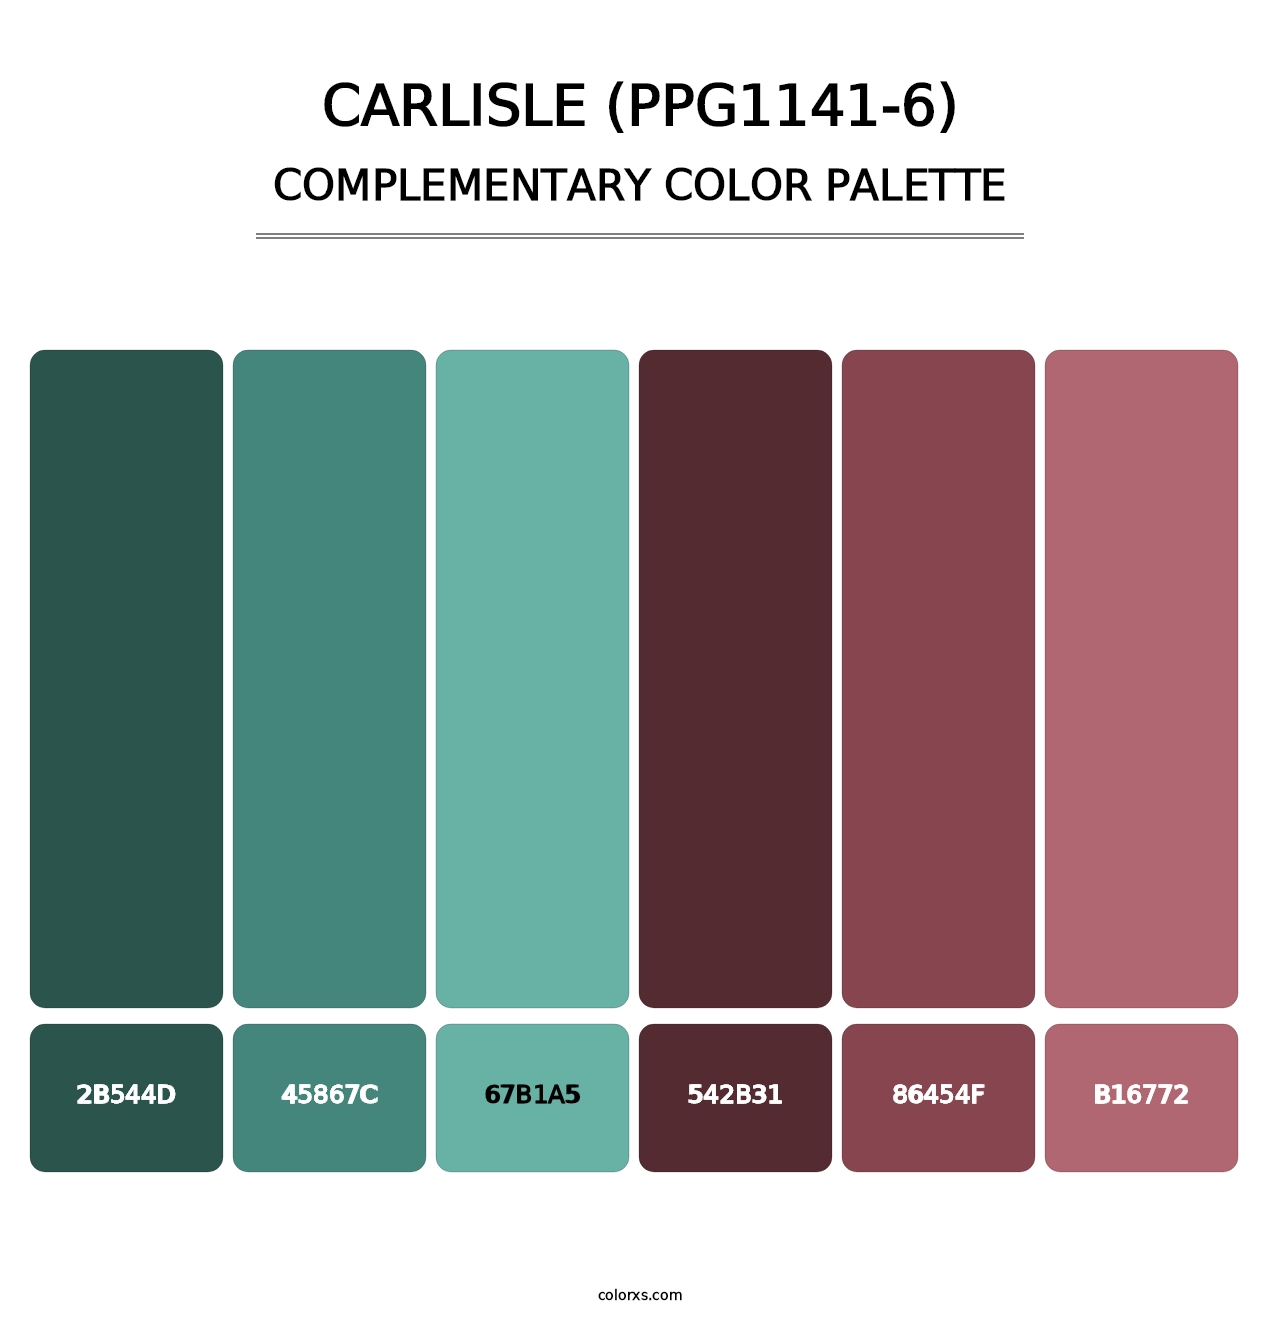 Carlisle (PPG1141-6) - Complementary Color Palette